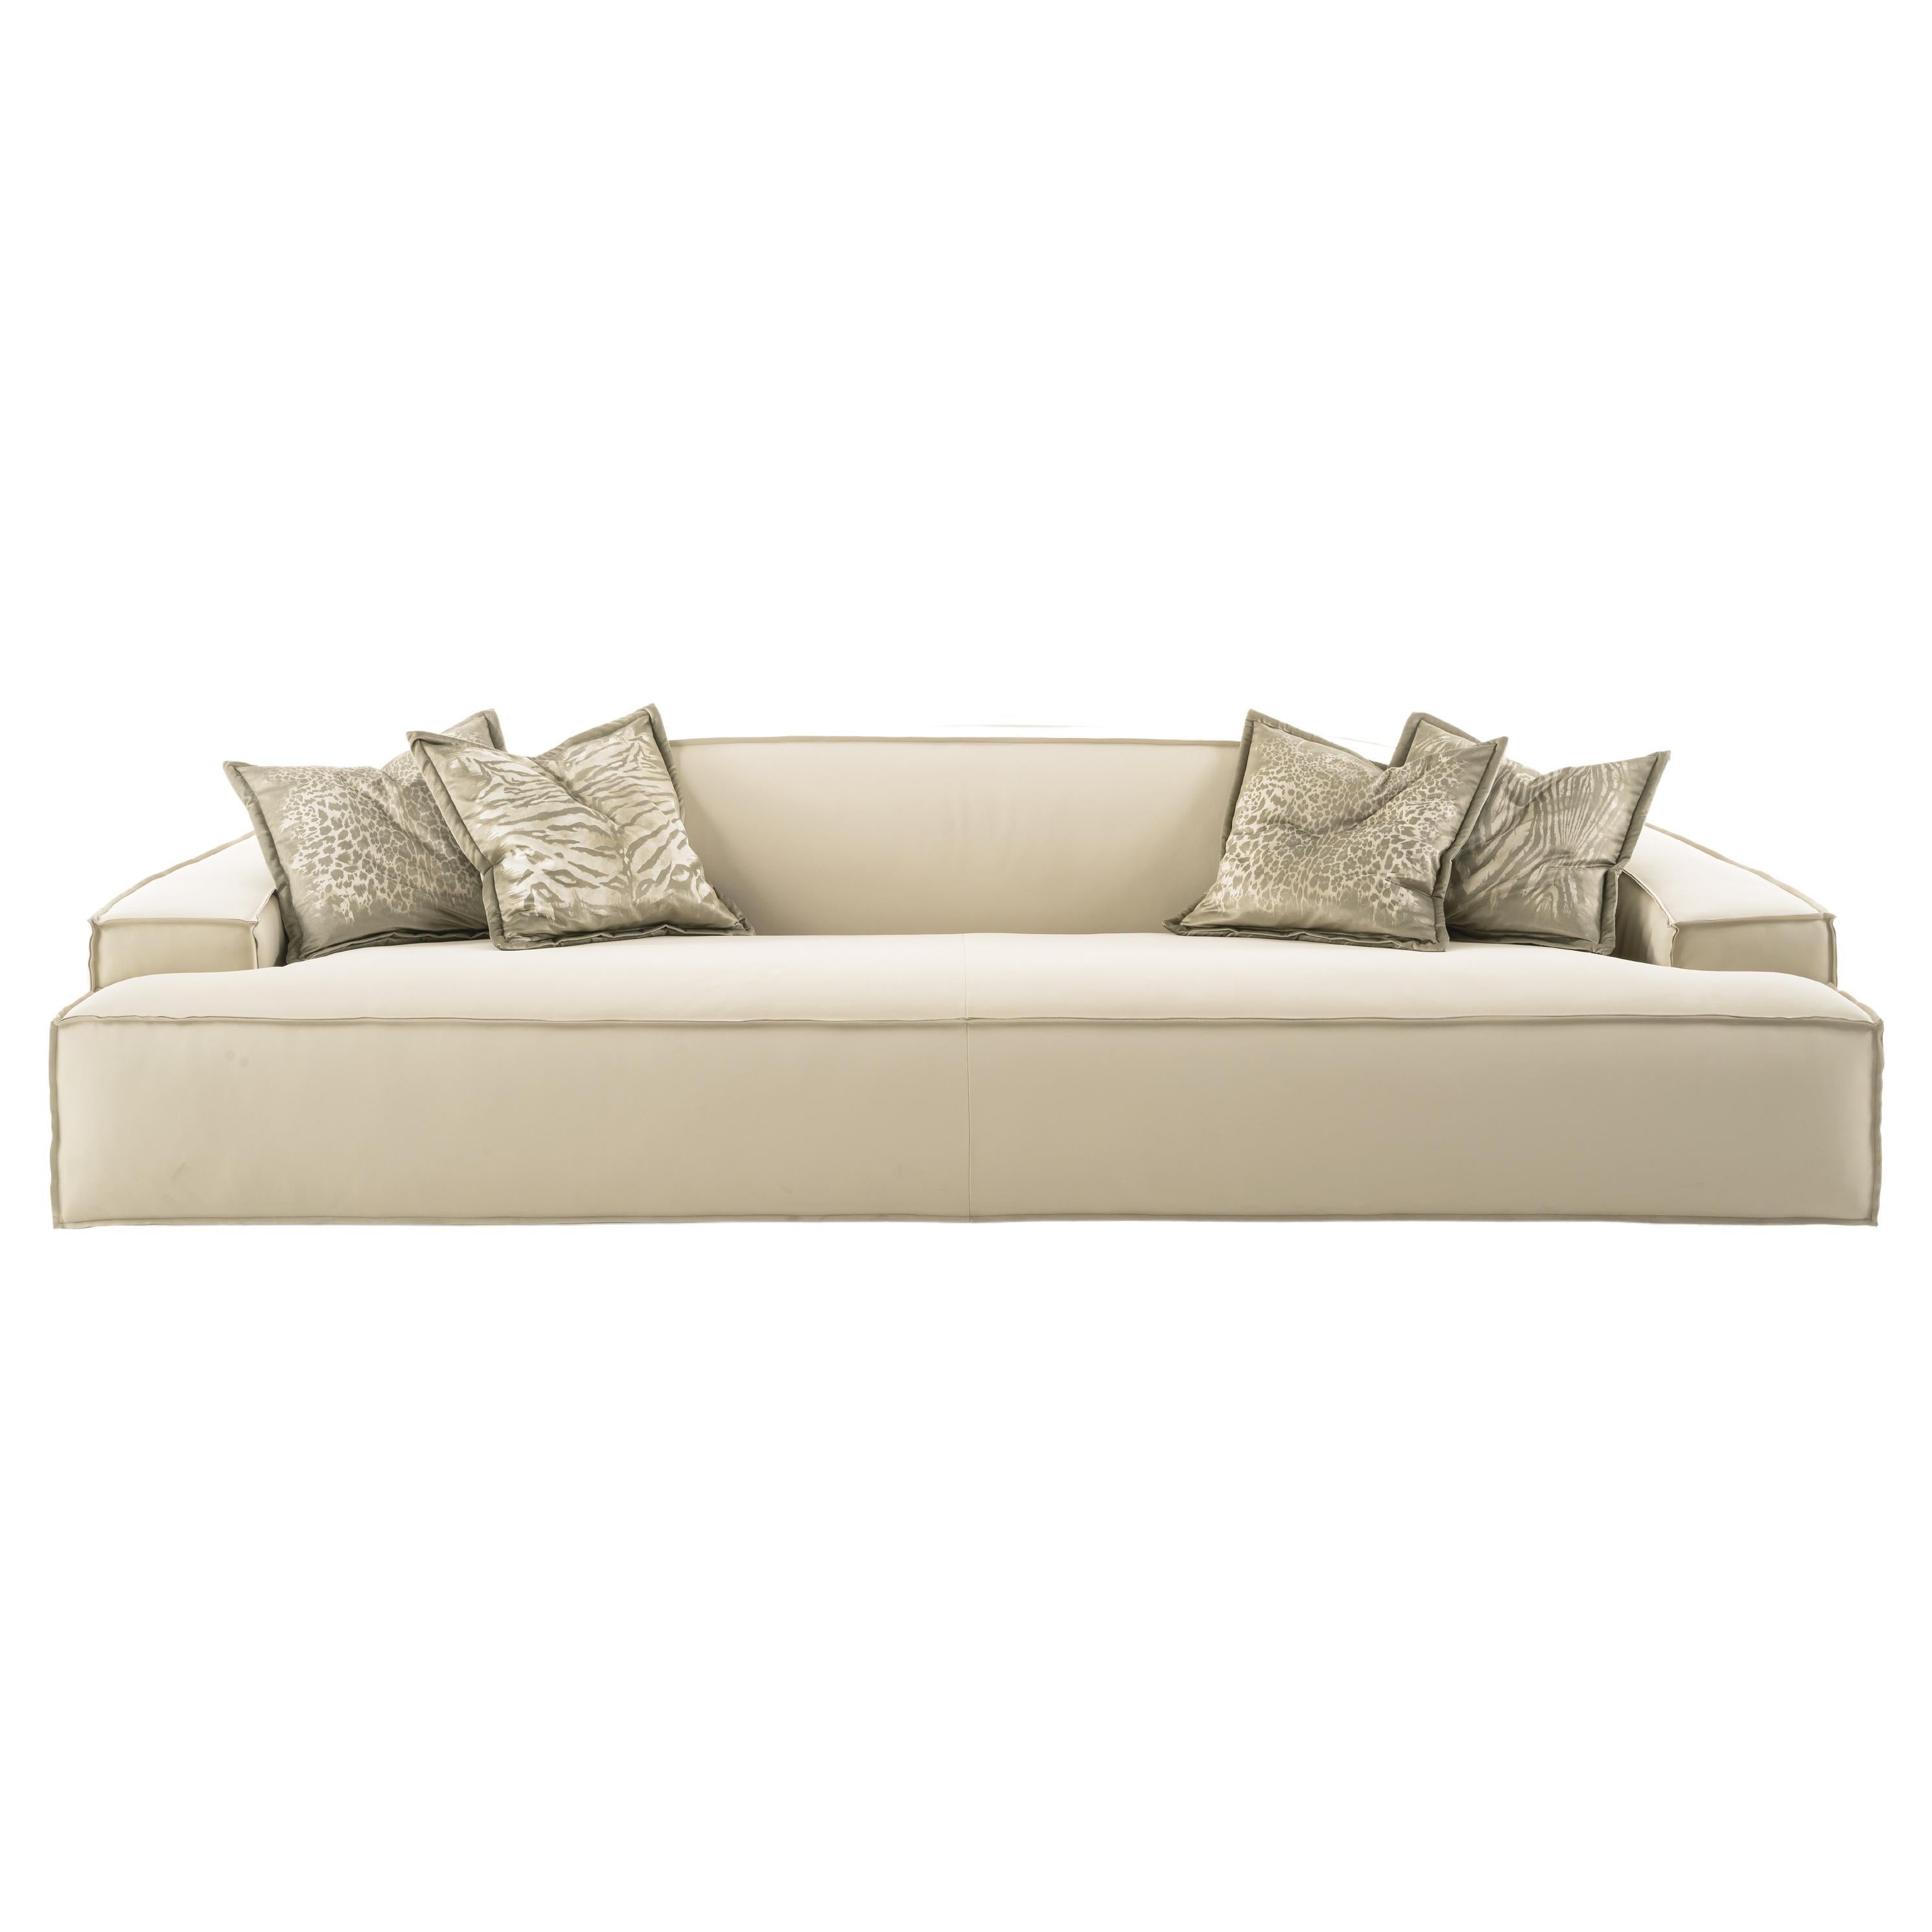 21st Century Assal Sofa in Leather by Roberto Cavalli Home Interiors